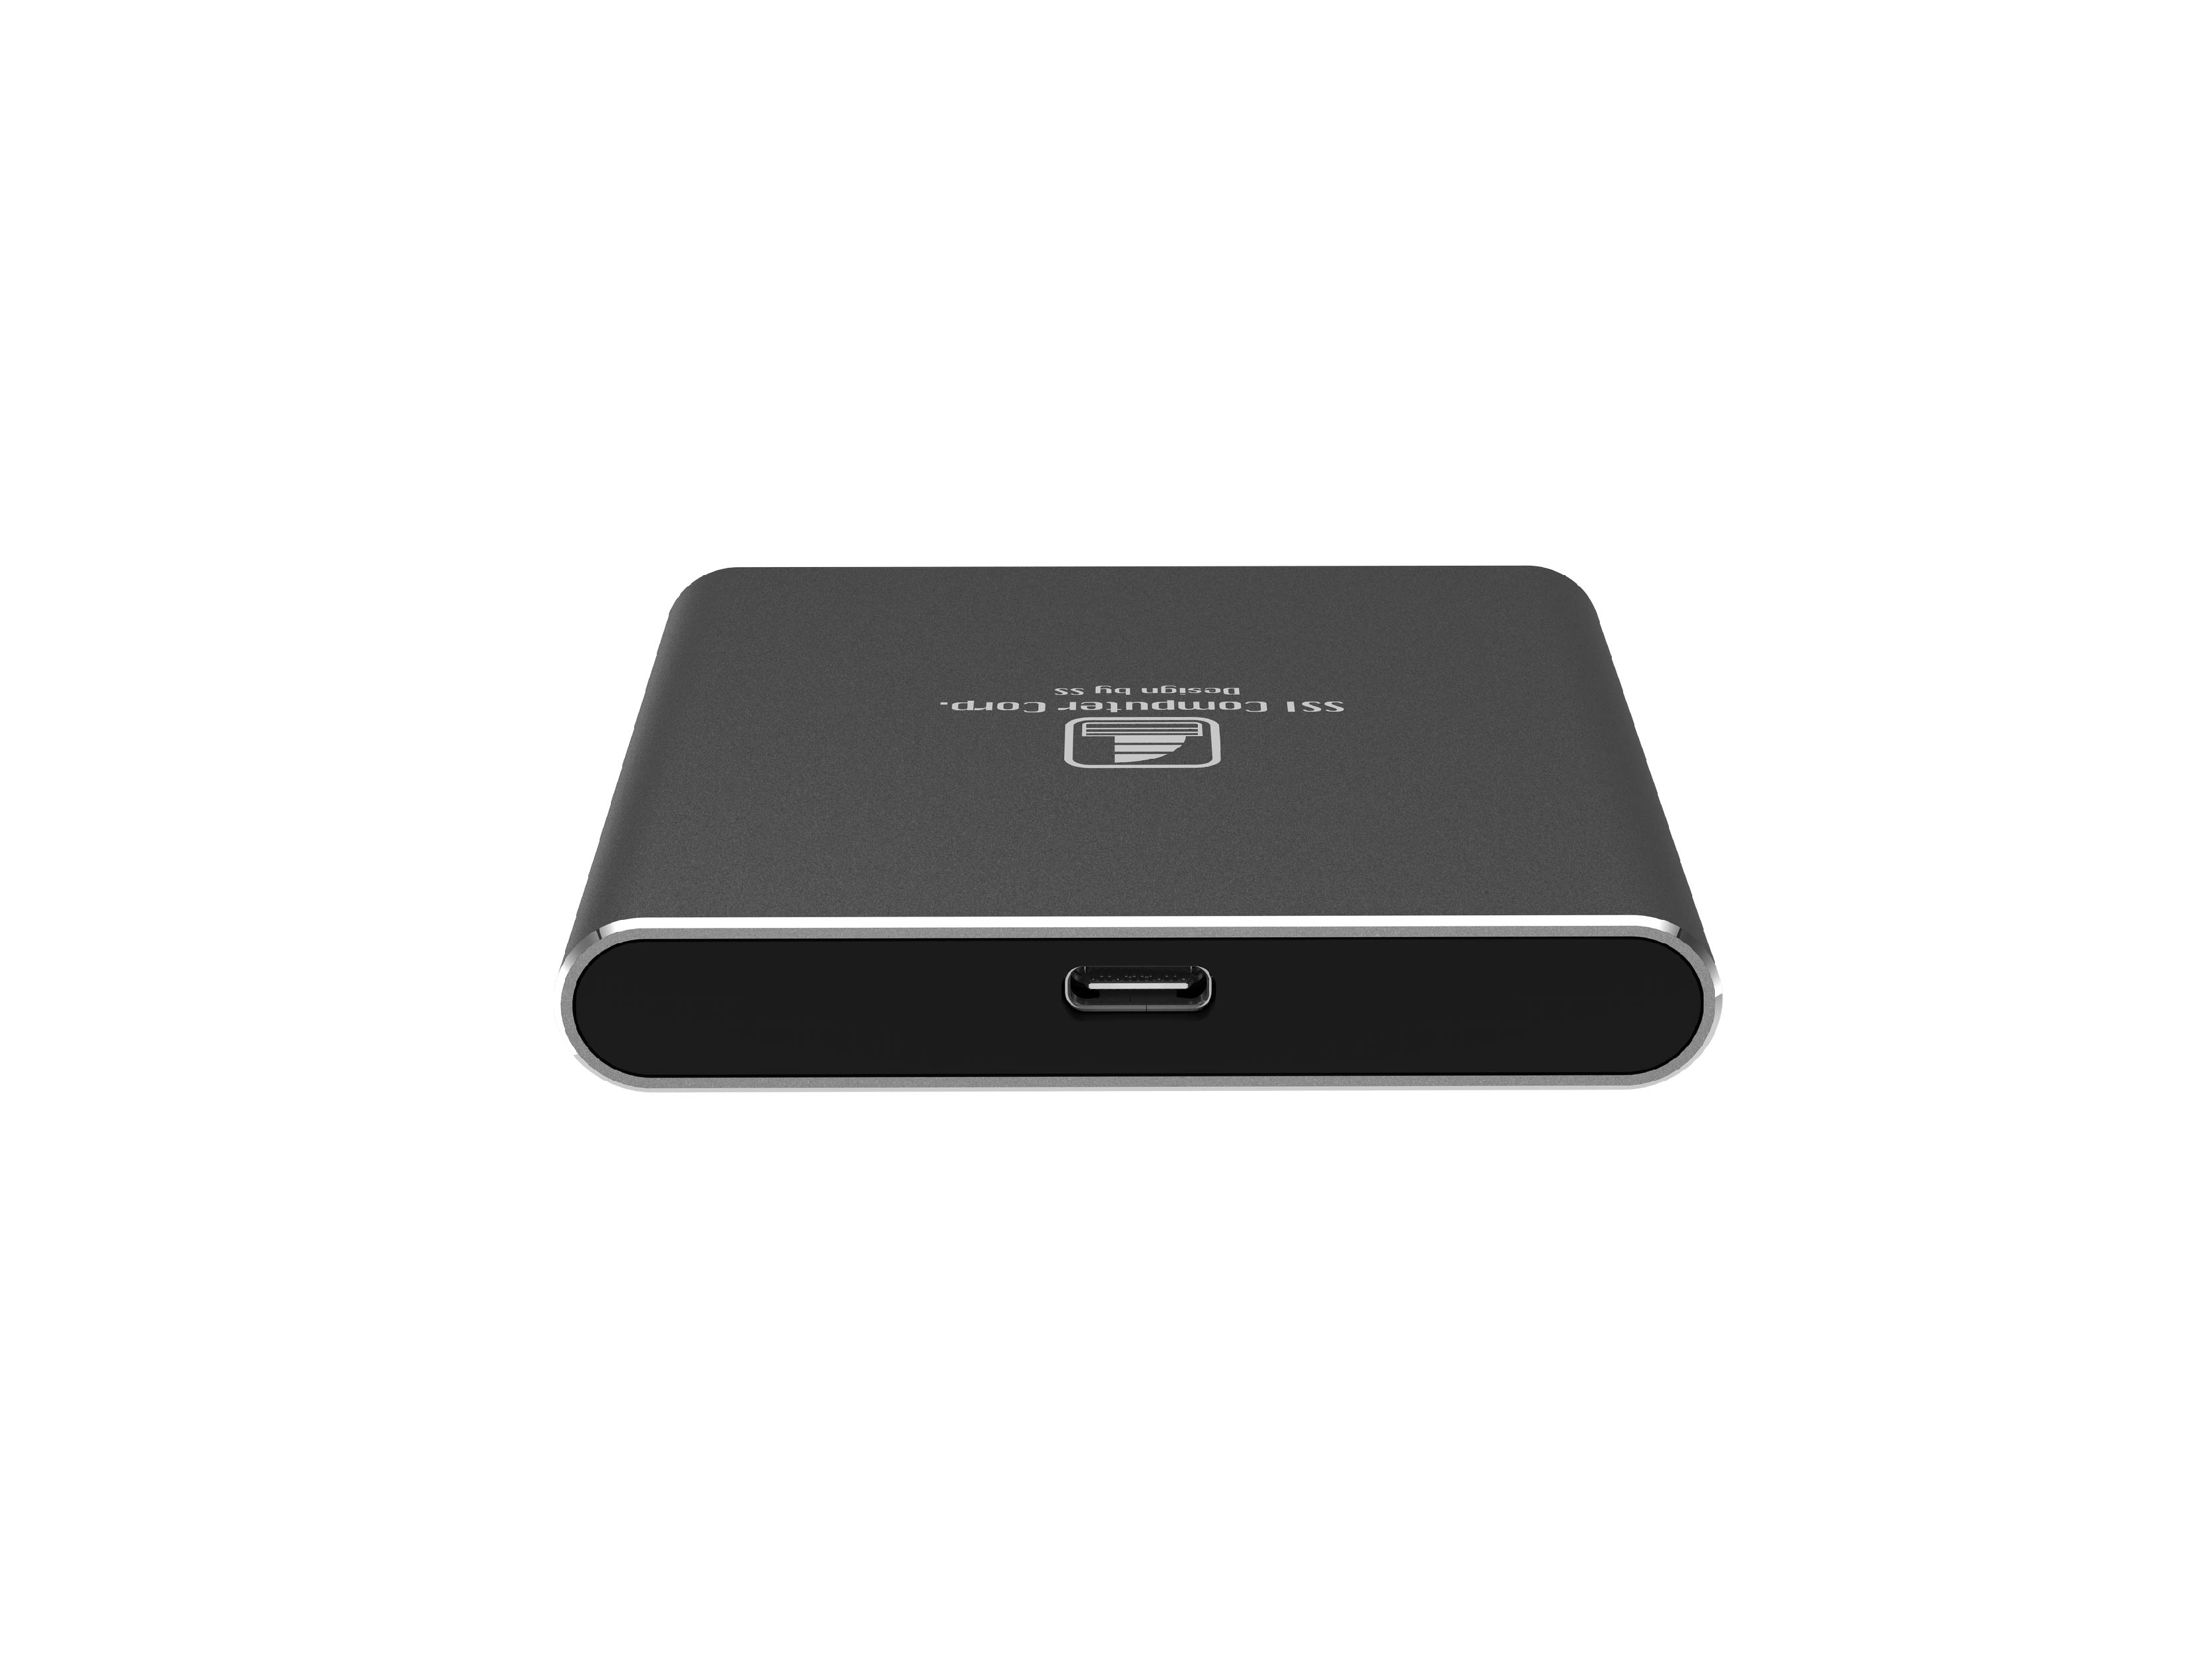 3 Port DP/HDMI MST HUB (SI-4073HDMI), 3 Port DP/HDMI MST HUB, USB-C to HDMIx1 and DPx2 adapter, compatible TB3 or USB-C with DP function.